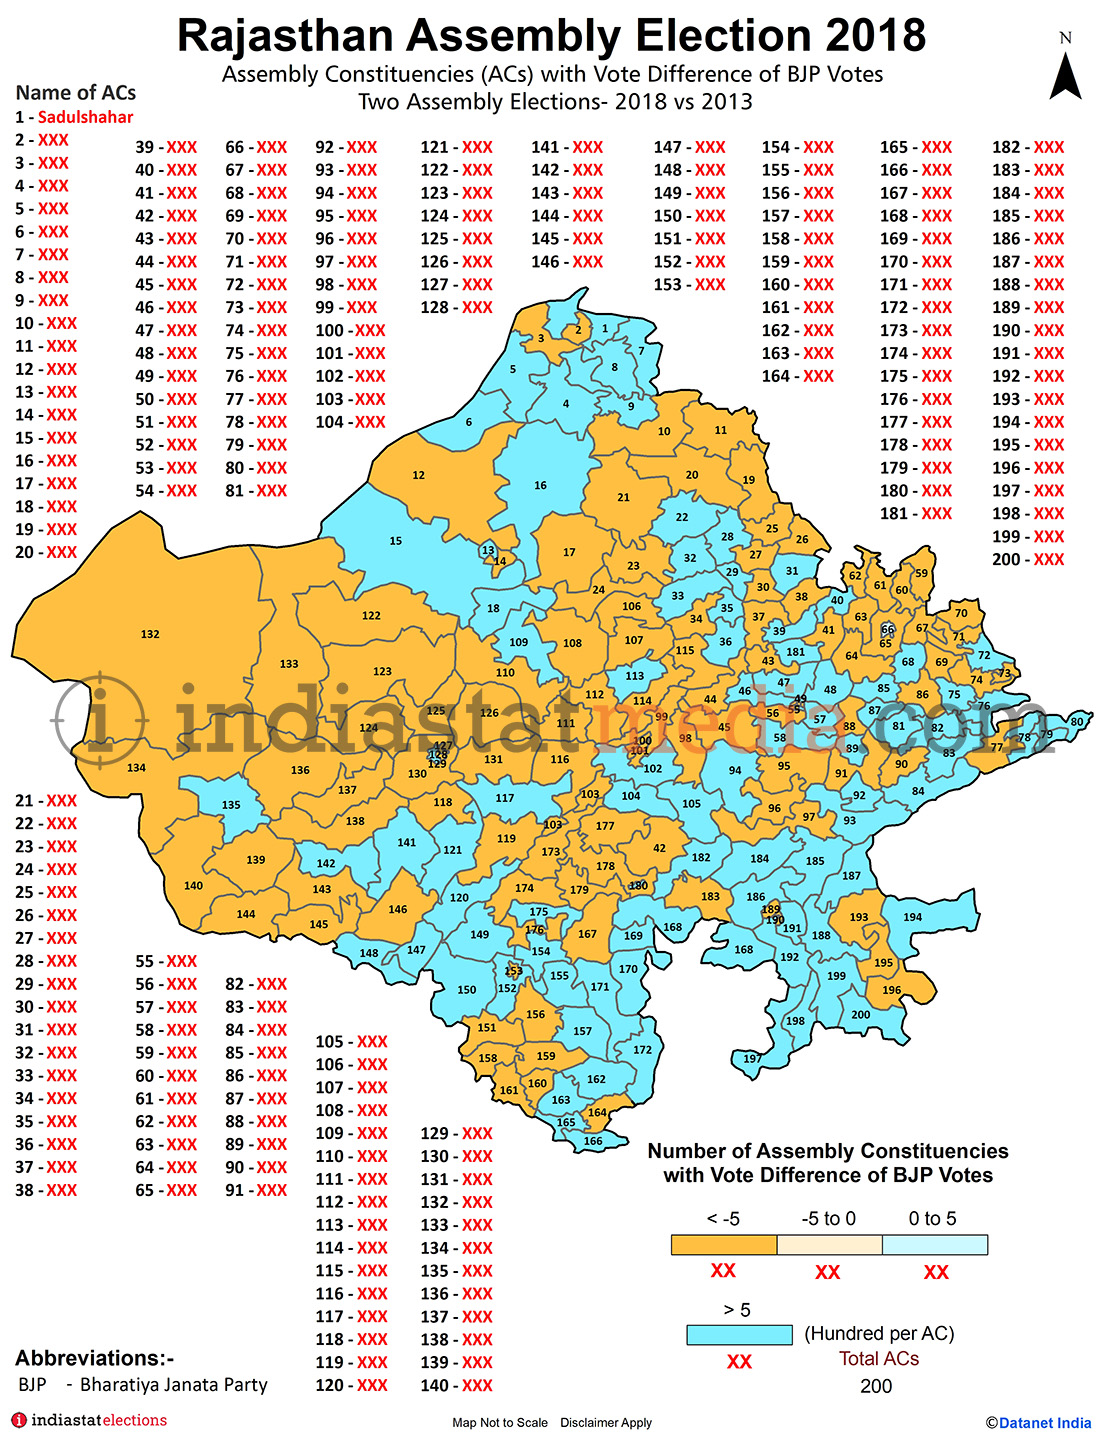 Assembly Constituencies with Vote Difference of BJP Votes in Rajasthan (Assembly Elections - 2013 & 2018)